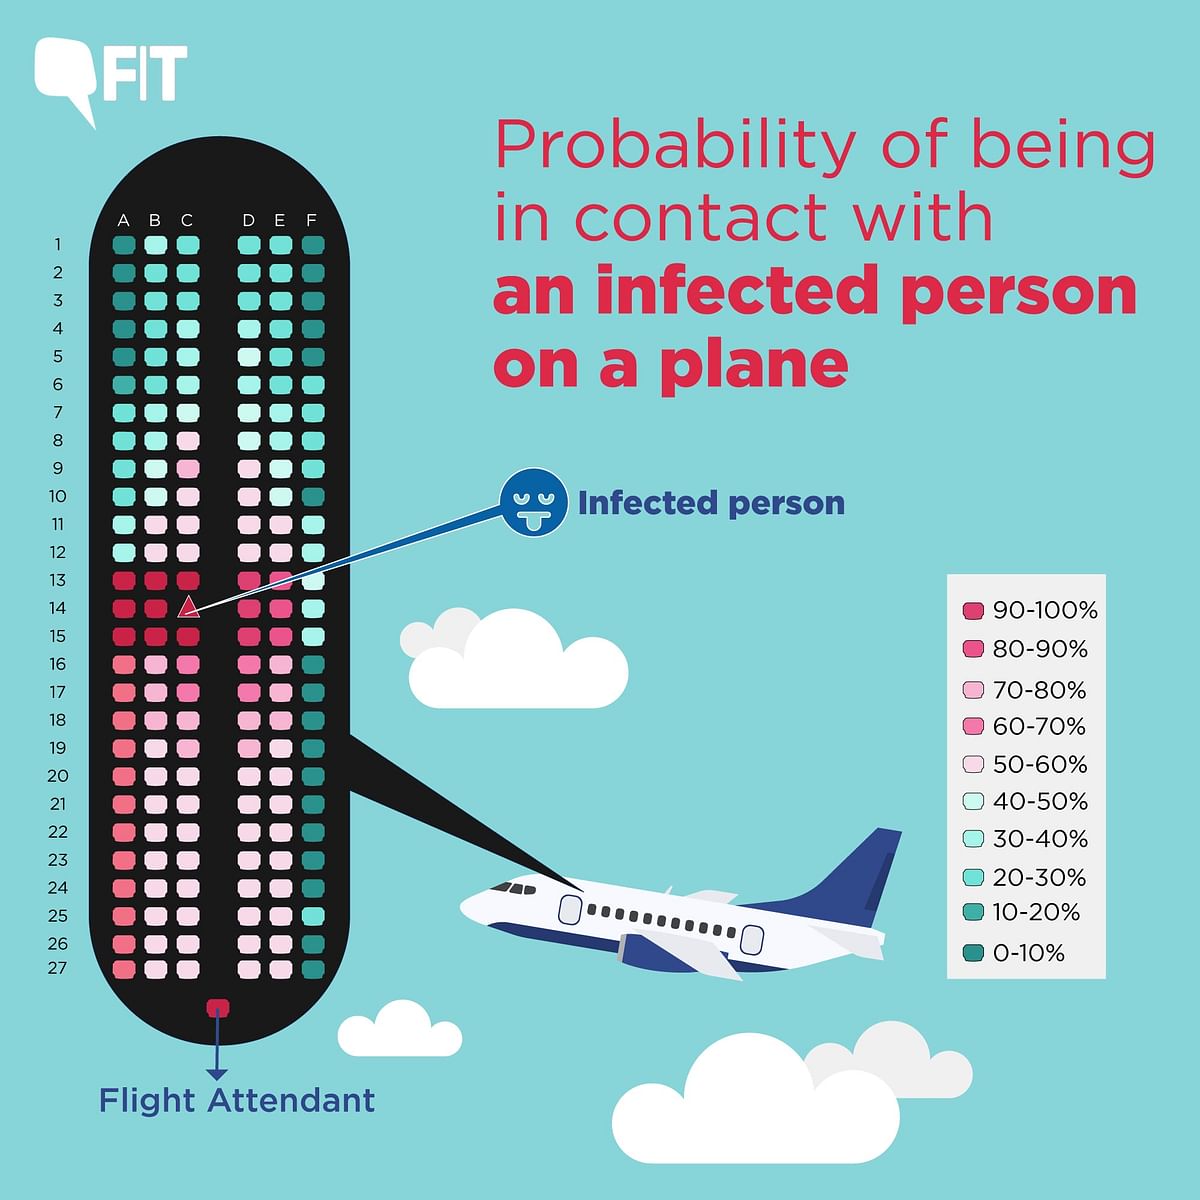 Coronavirus: What are the Chances One Gets Infected in a Plane?